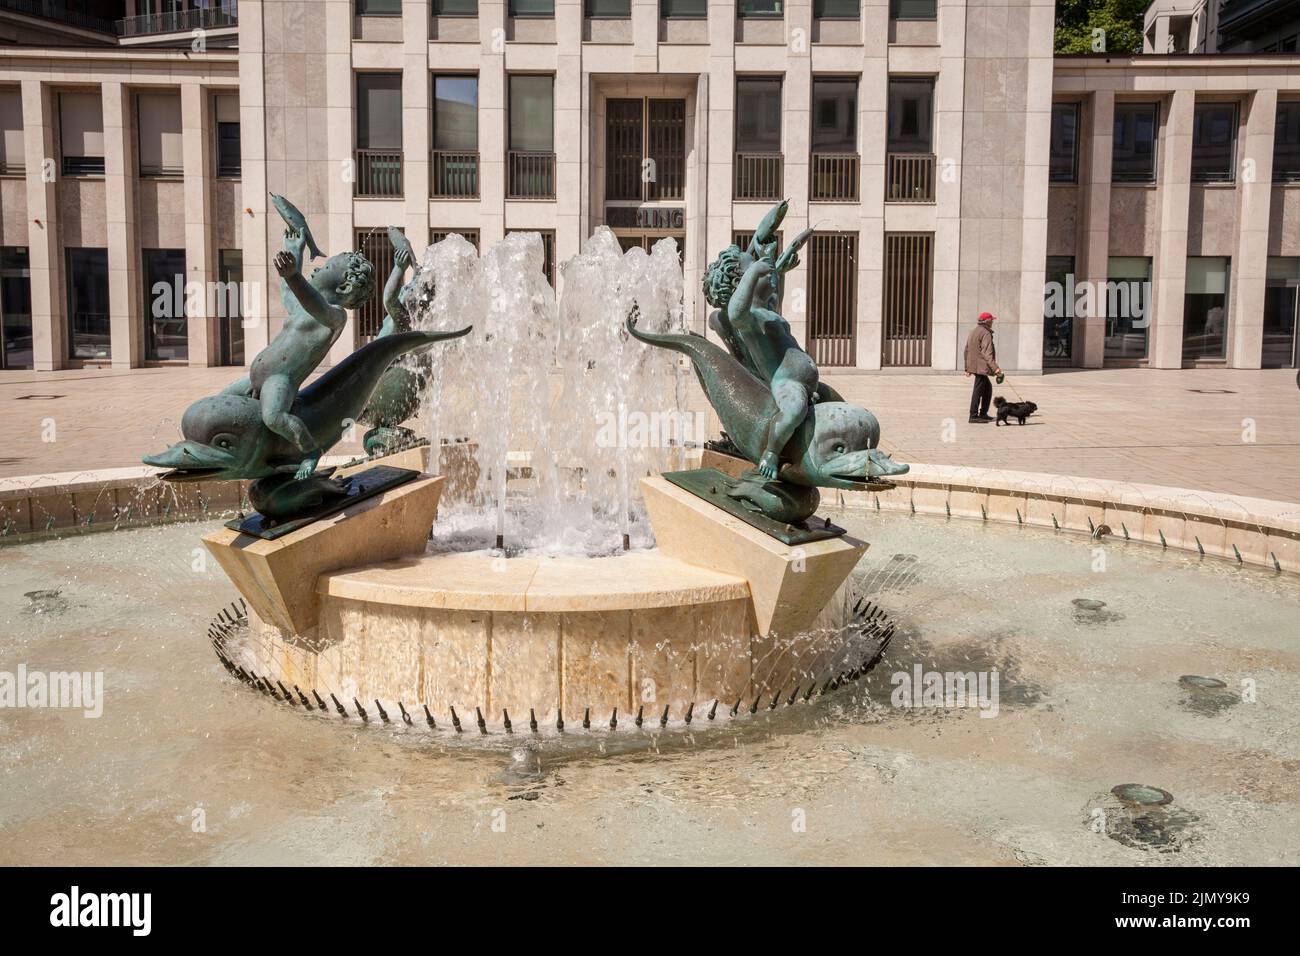 the Gerling Quartier, fountain with four boys riding on dolphins by artist Arno Breker at the Gereonshof, Cologne, Germany. das Gerling Quartier, Brun Stock Photo